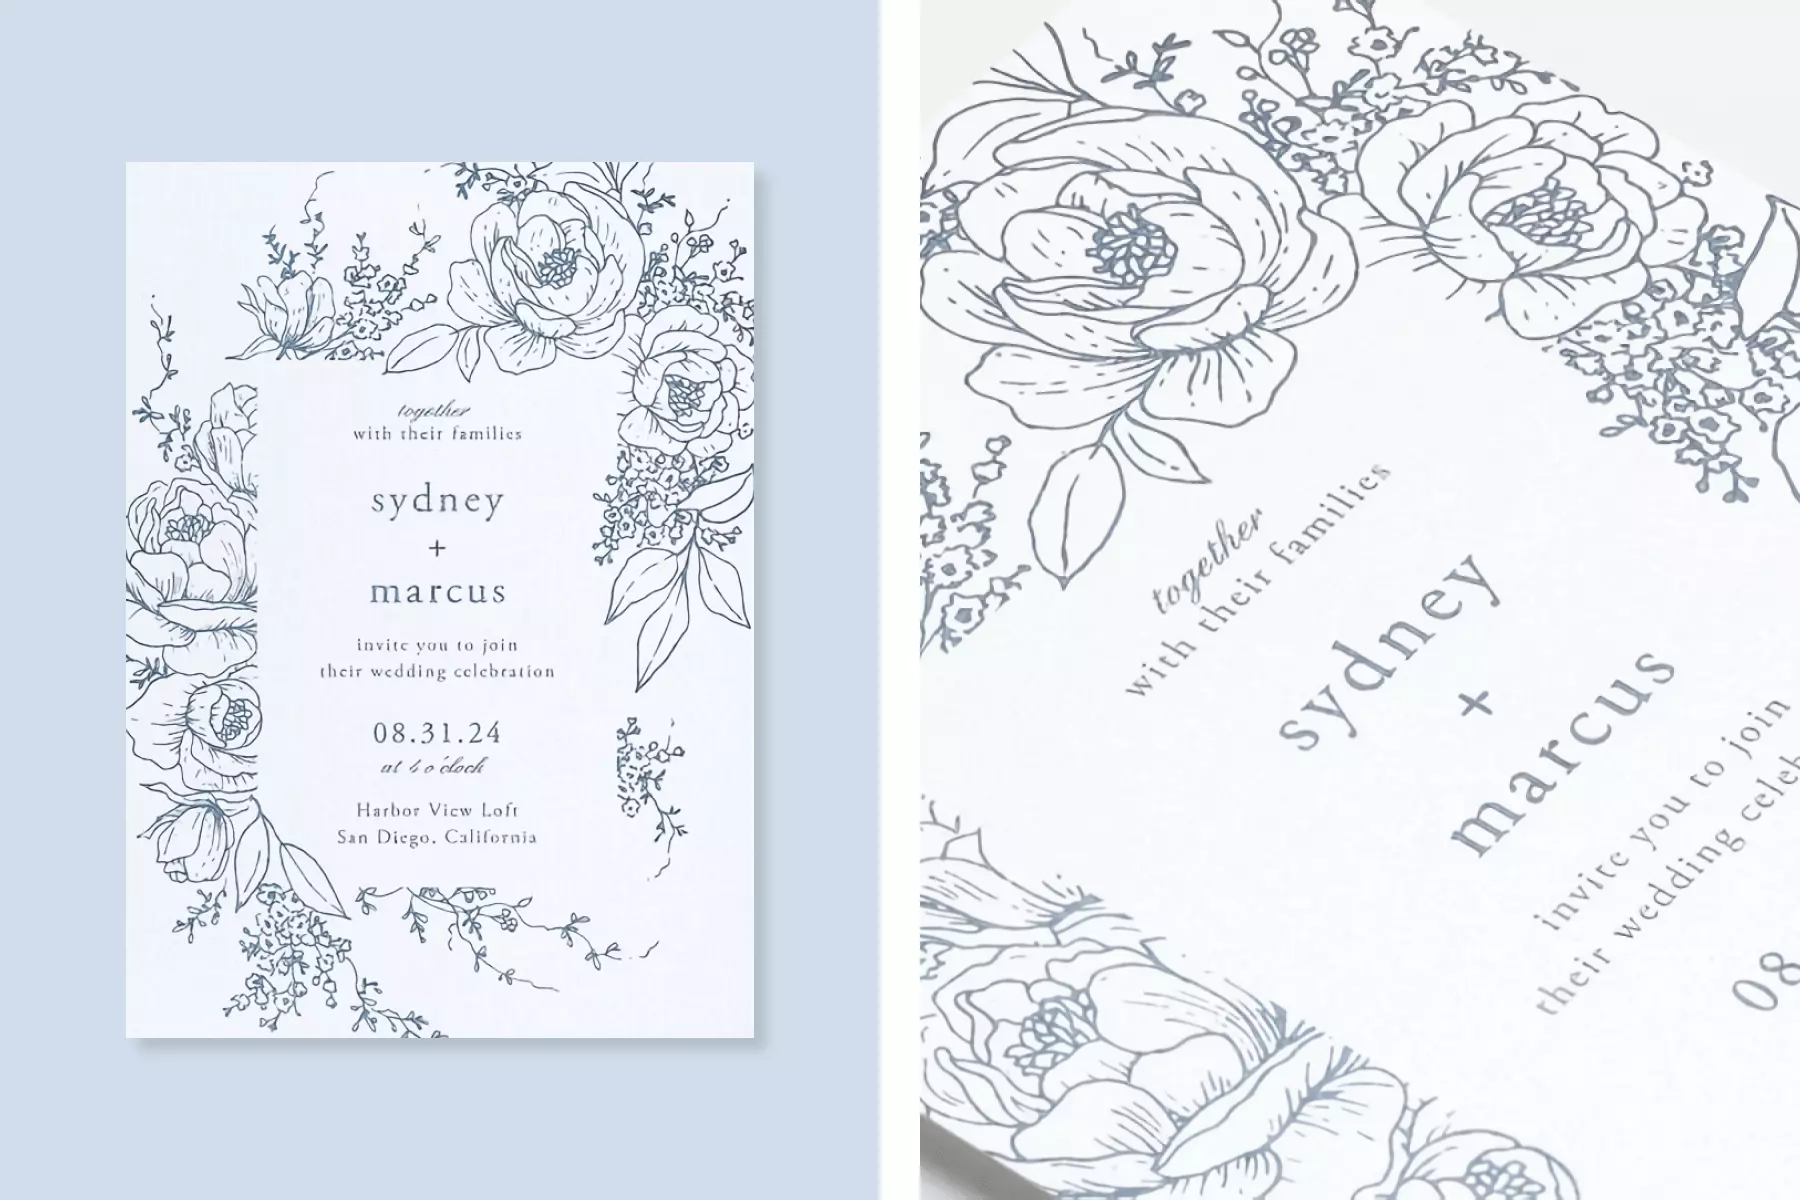 A wedding invitation with gray rose doodles around the border.